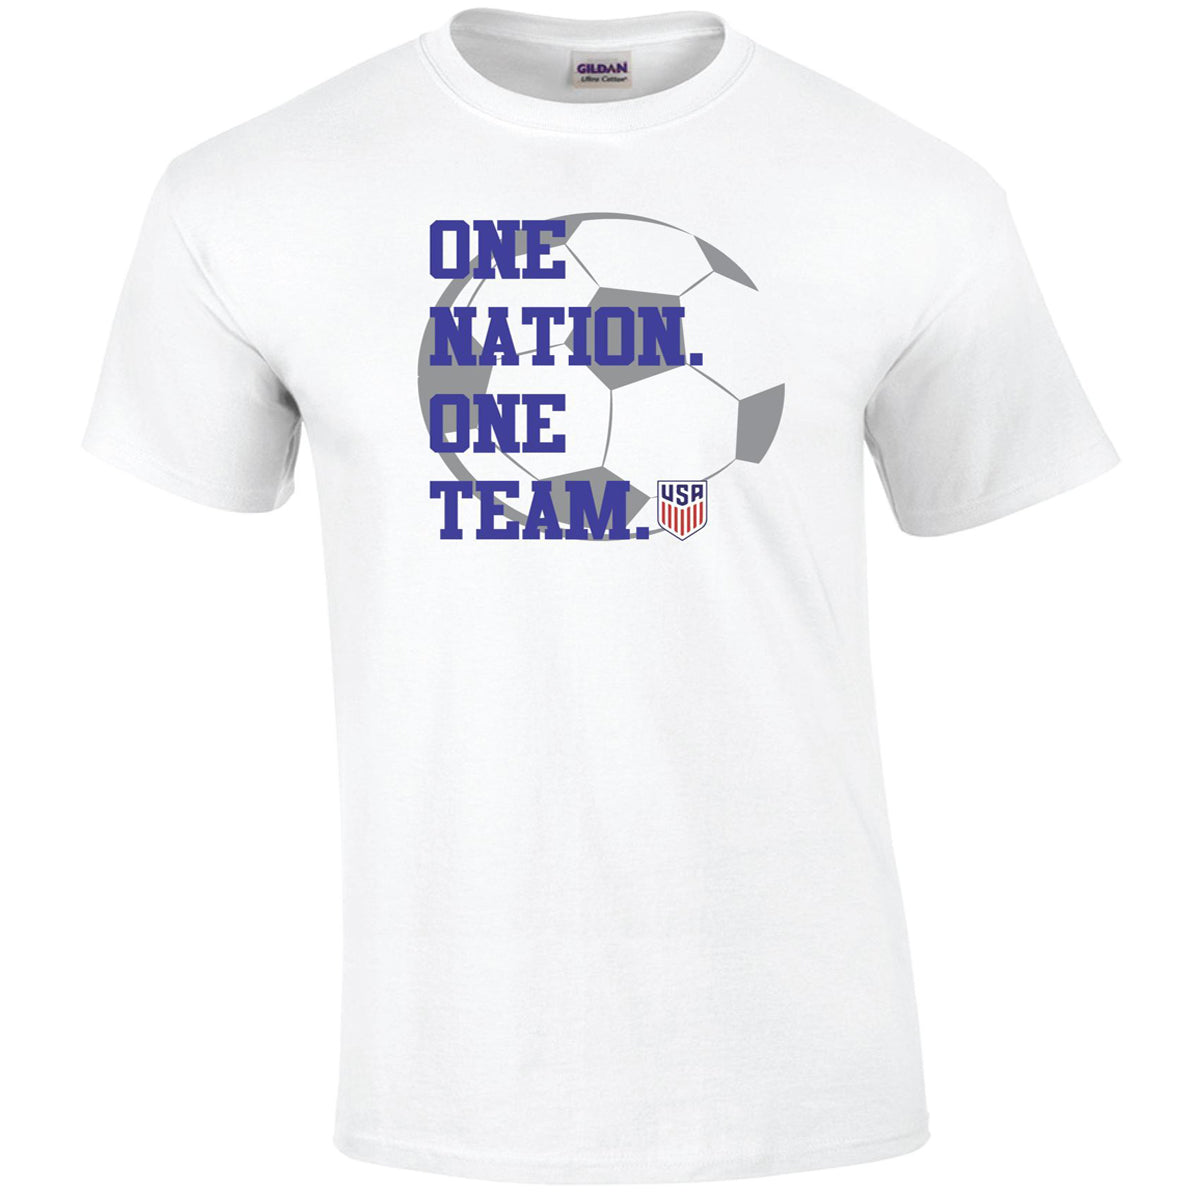 USA Soccer T-Shirt - One Nation One Team T-shirts 411 Youth Medium White Youth